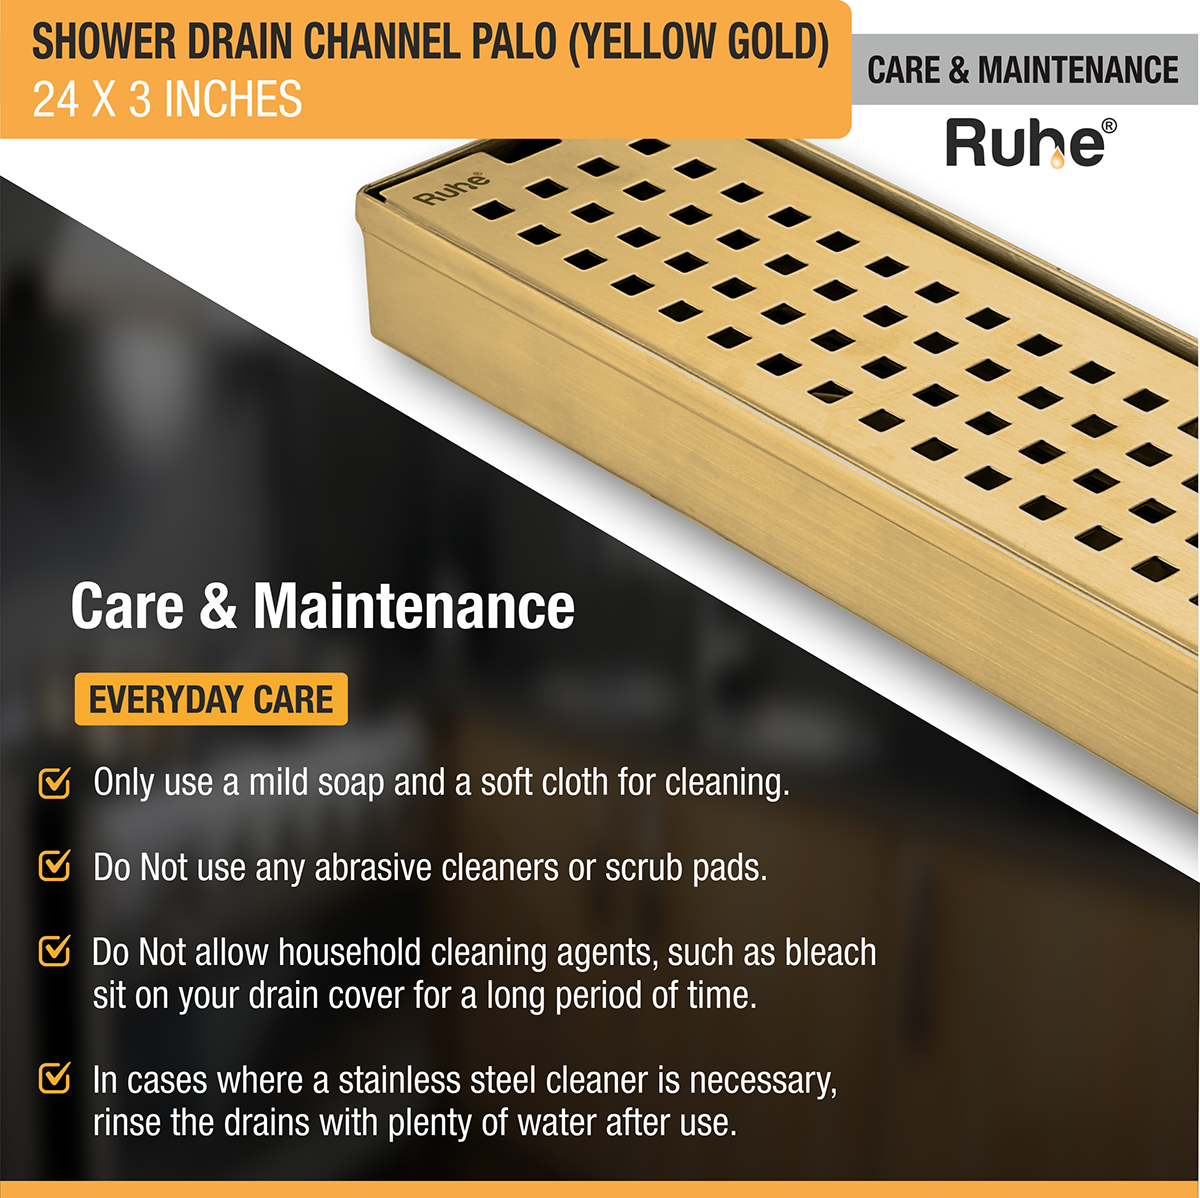 Palo Shower Drain Channel (24 x 3 Inches) YELLOW GOLD care and maintenance